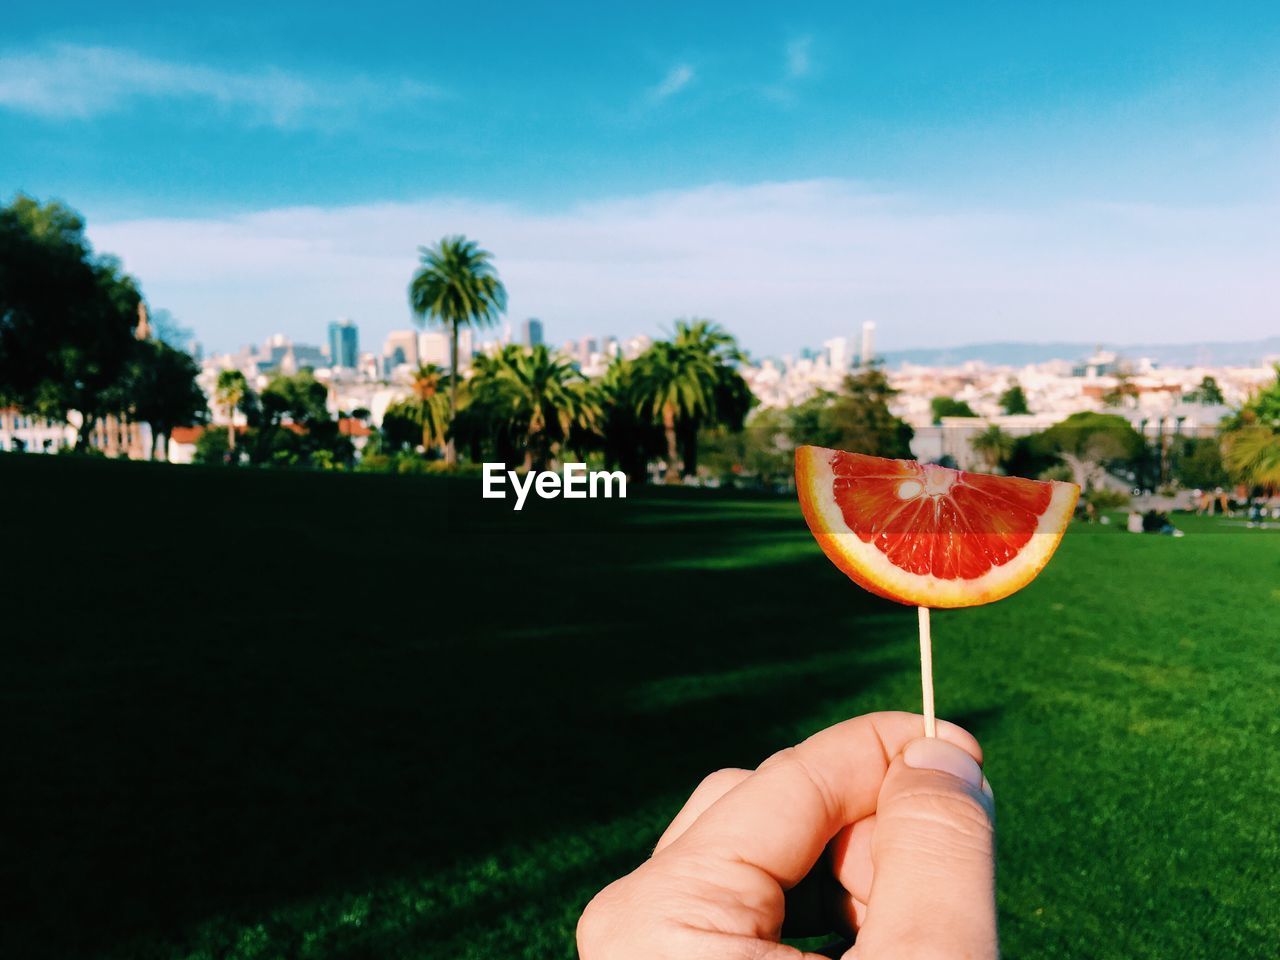 Cropped hand holding blood orange on grassy field against sky